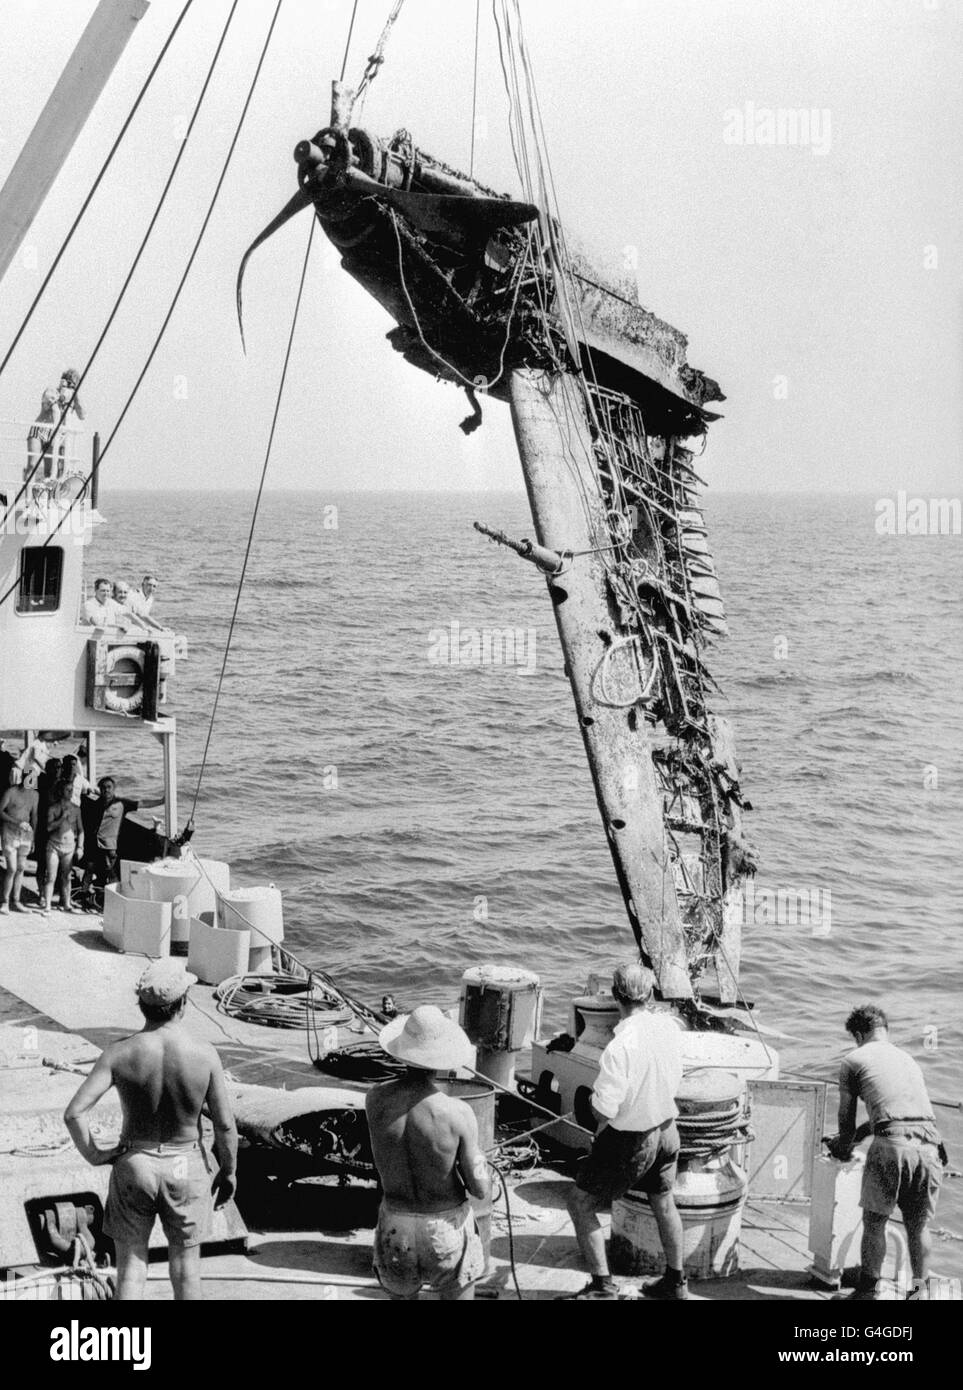 Members of the RAF Sub-Aqua Club in Malta see part of a wartime Spitfire being raised from the sea bed off Gozo, a small island to the north. It took six days, clearing sand and weed, to bring the plane up. A witness was found who saw the plane go down, 31 years ago, and picked the pilot up Stock Photo